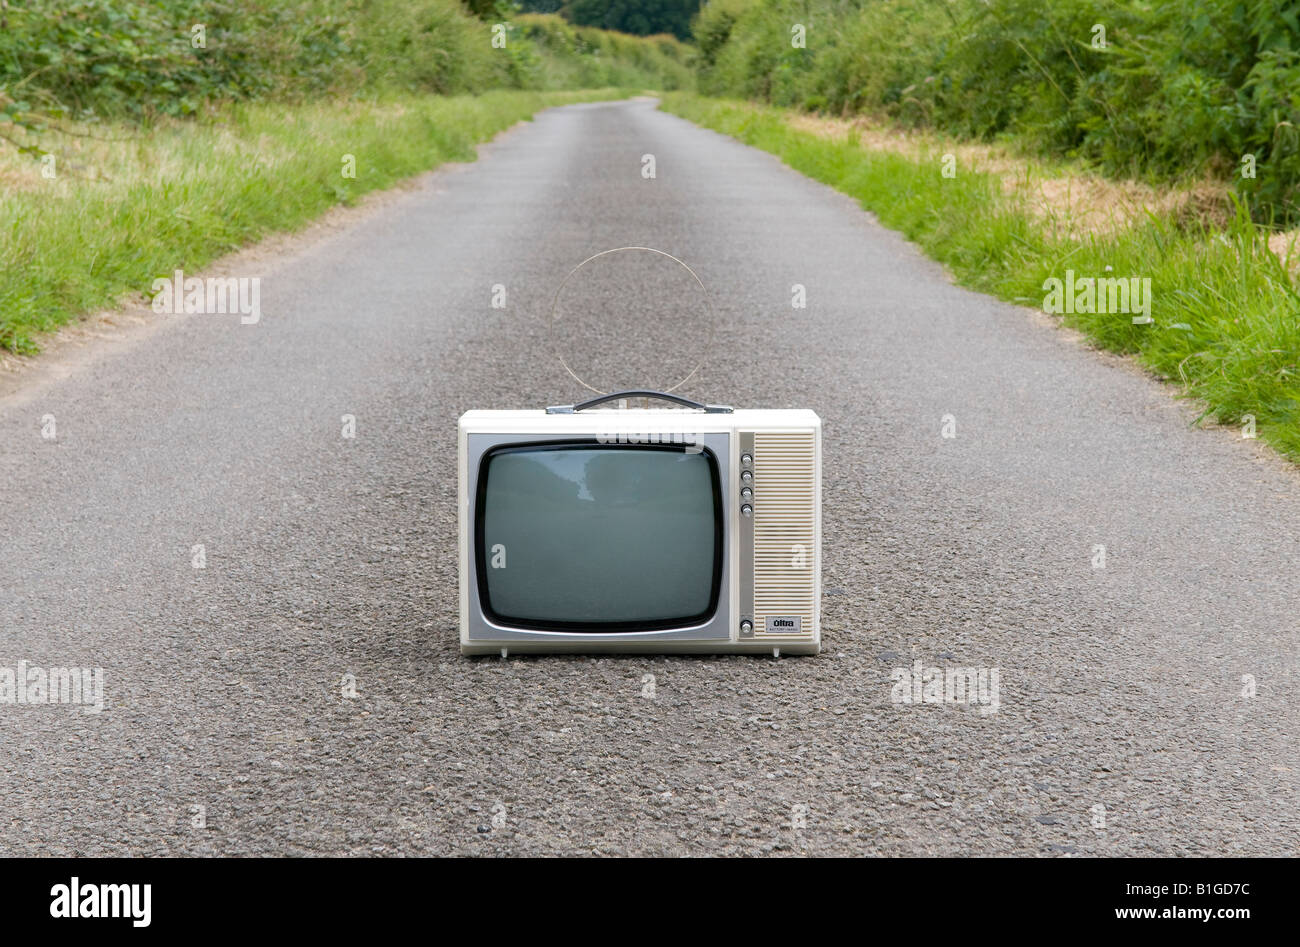 retro style portable television on country road Stock Photo